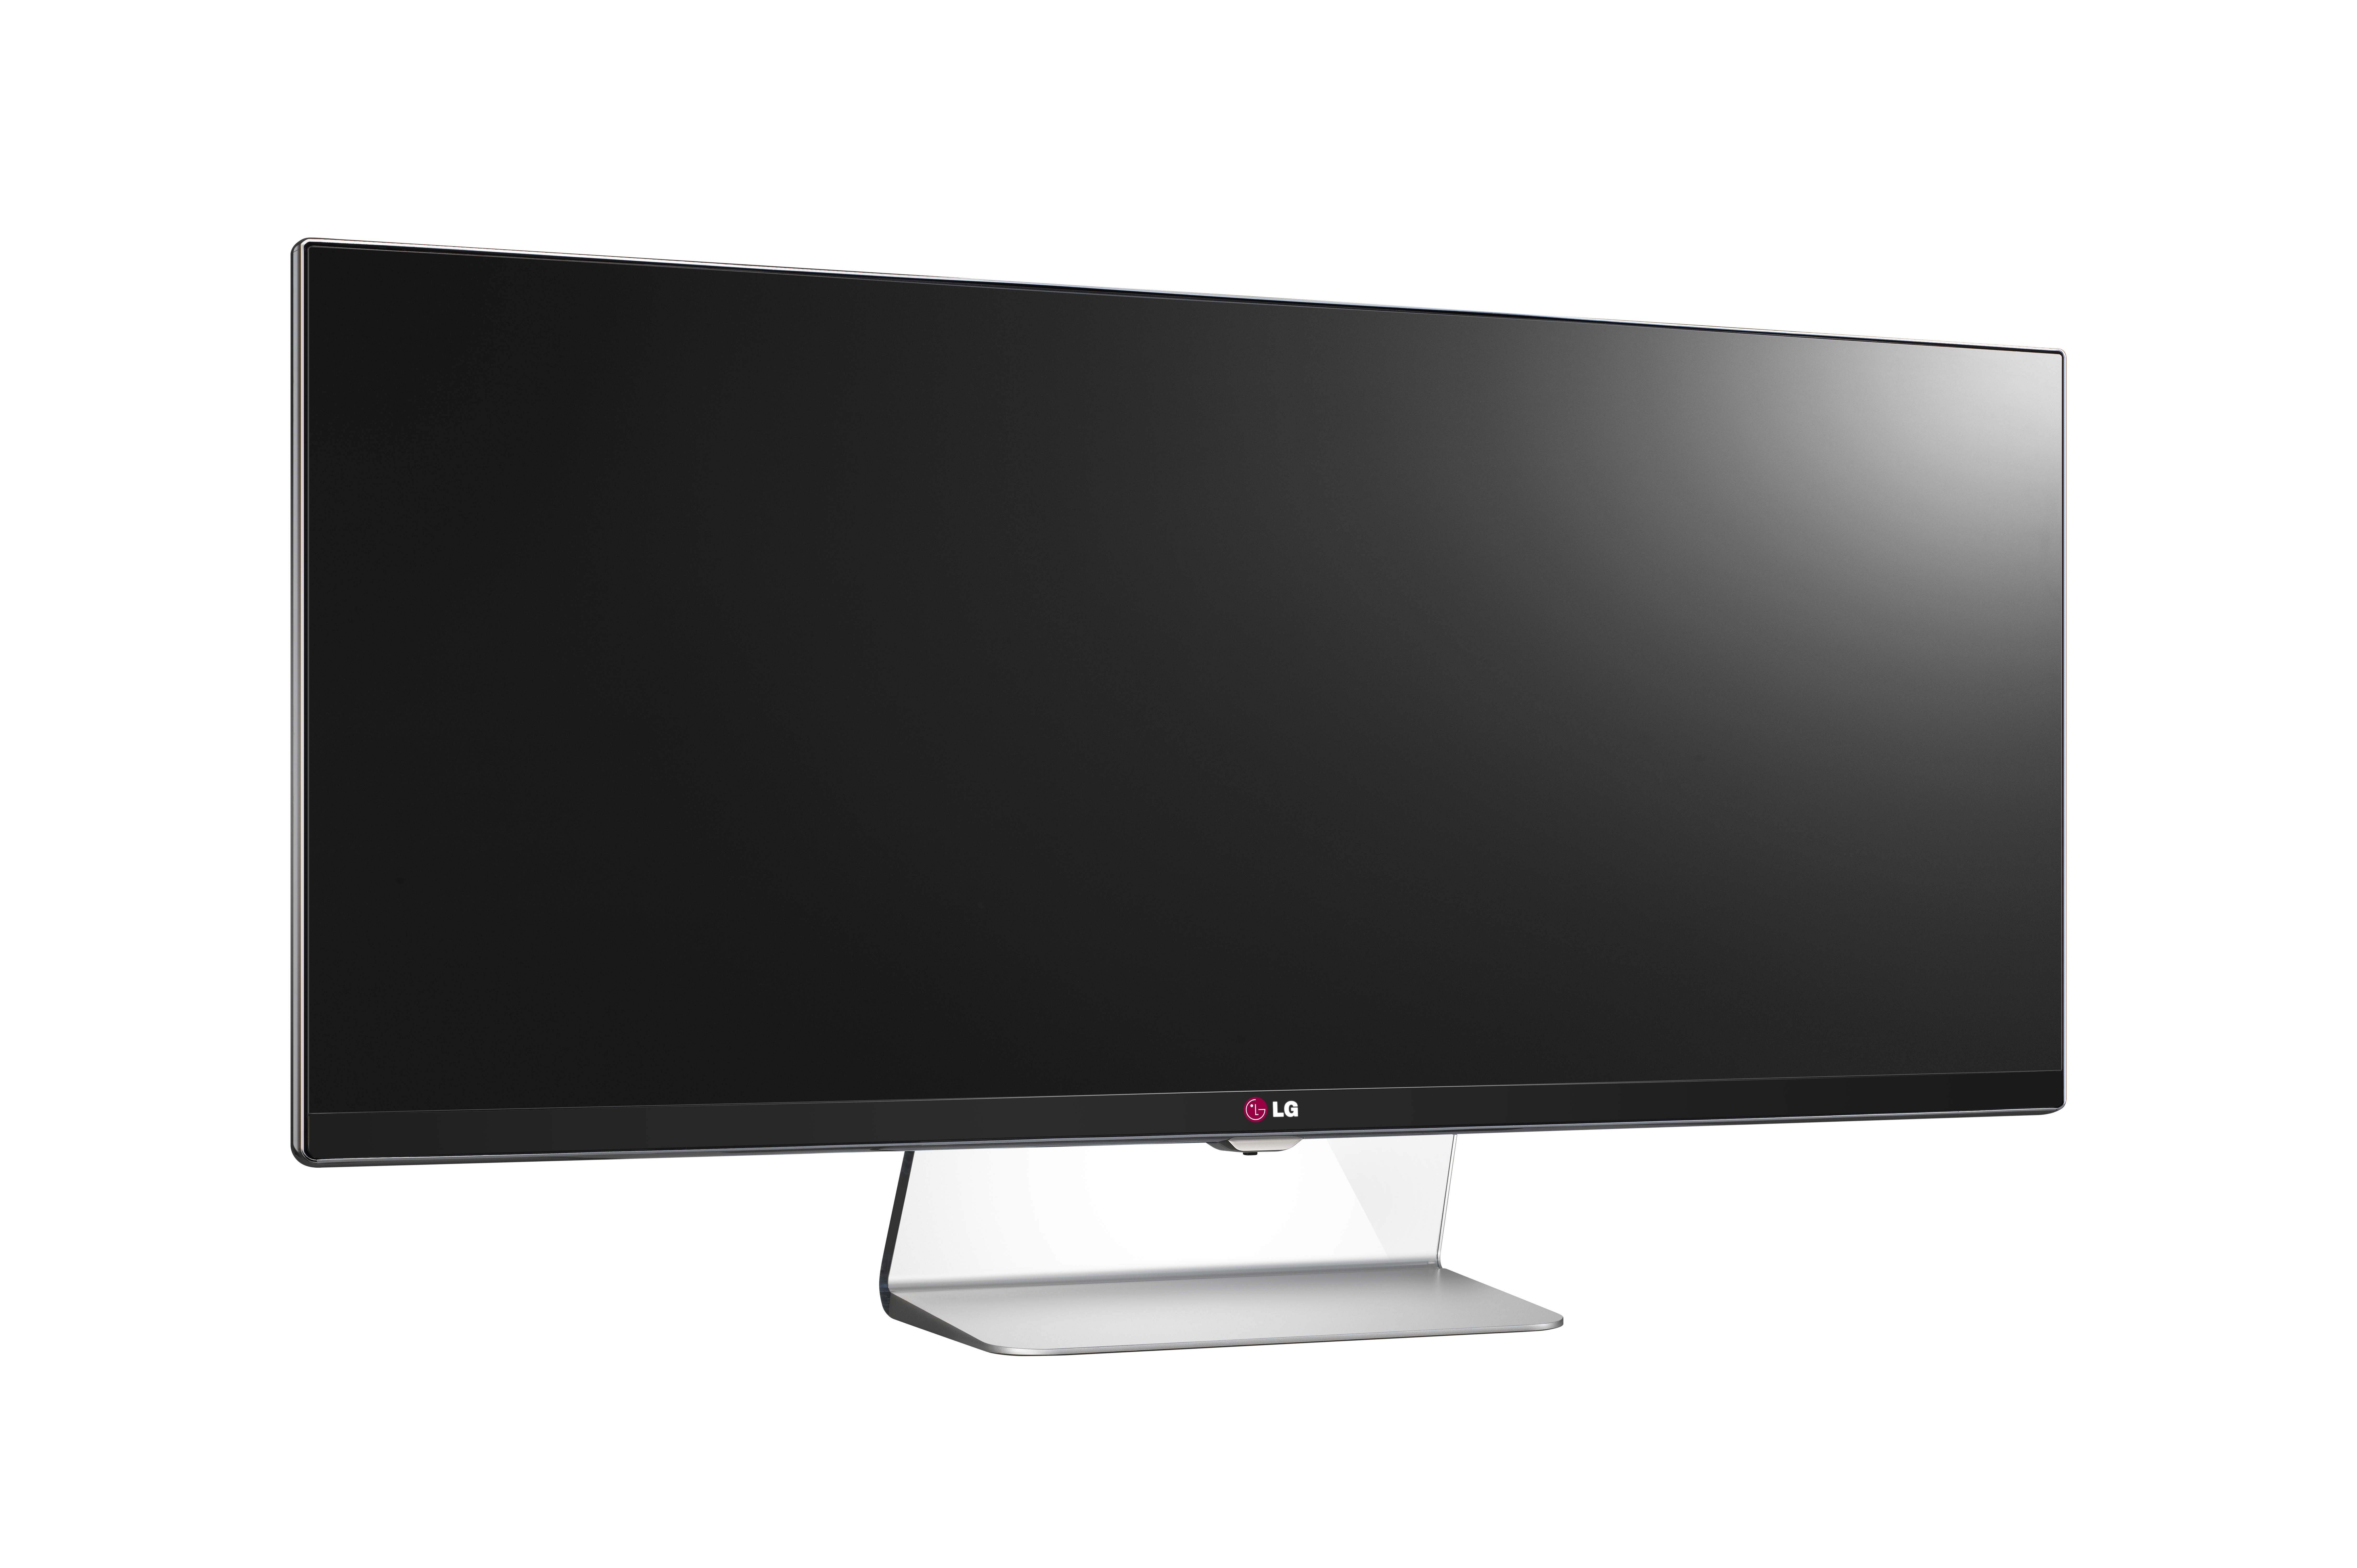 Front view of the LG IPS 21:9 UltraWide model UM95